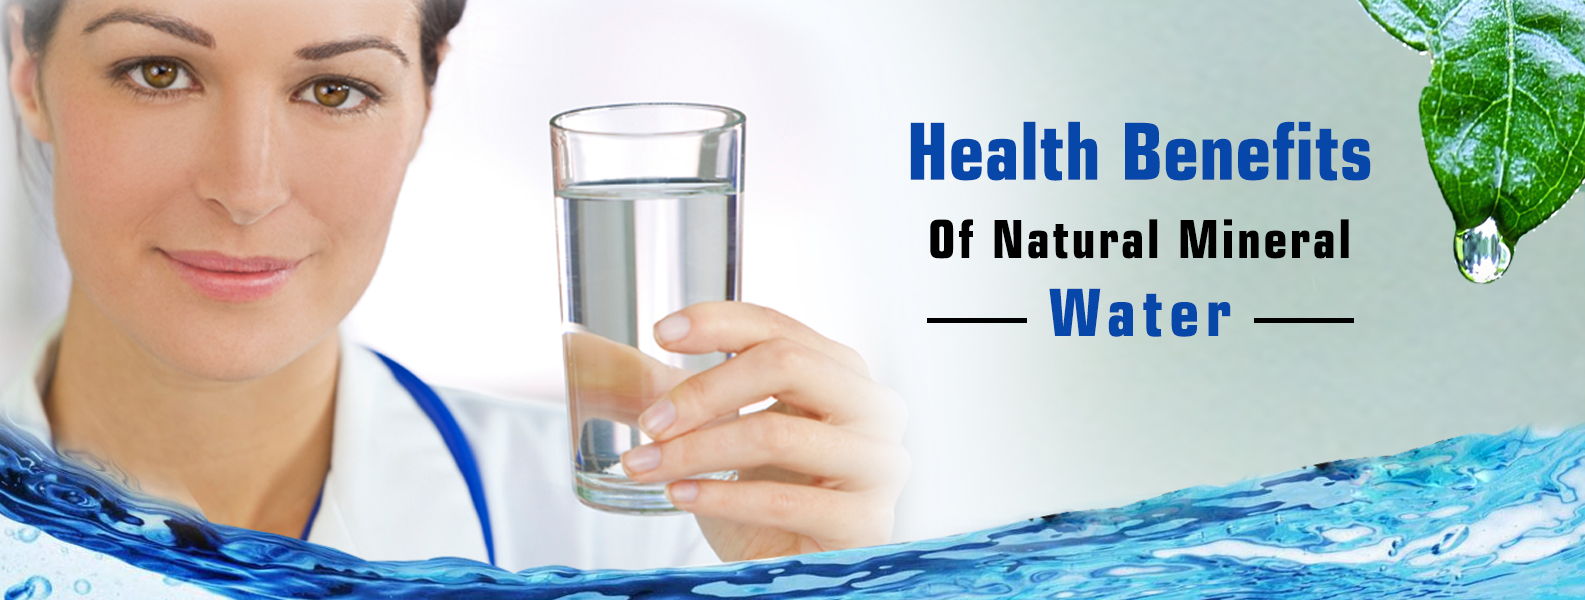 What are the Top 10 Amazing health benefits of natural mineral water?